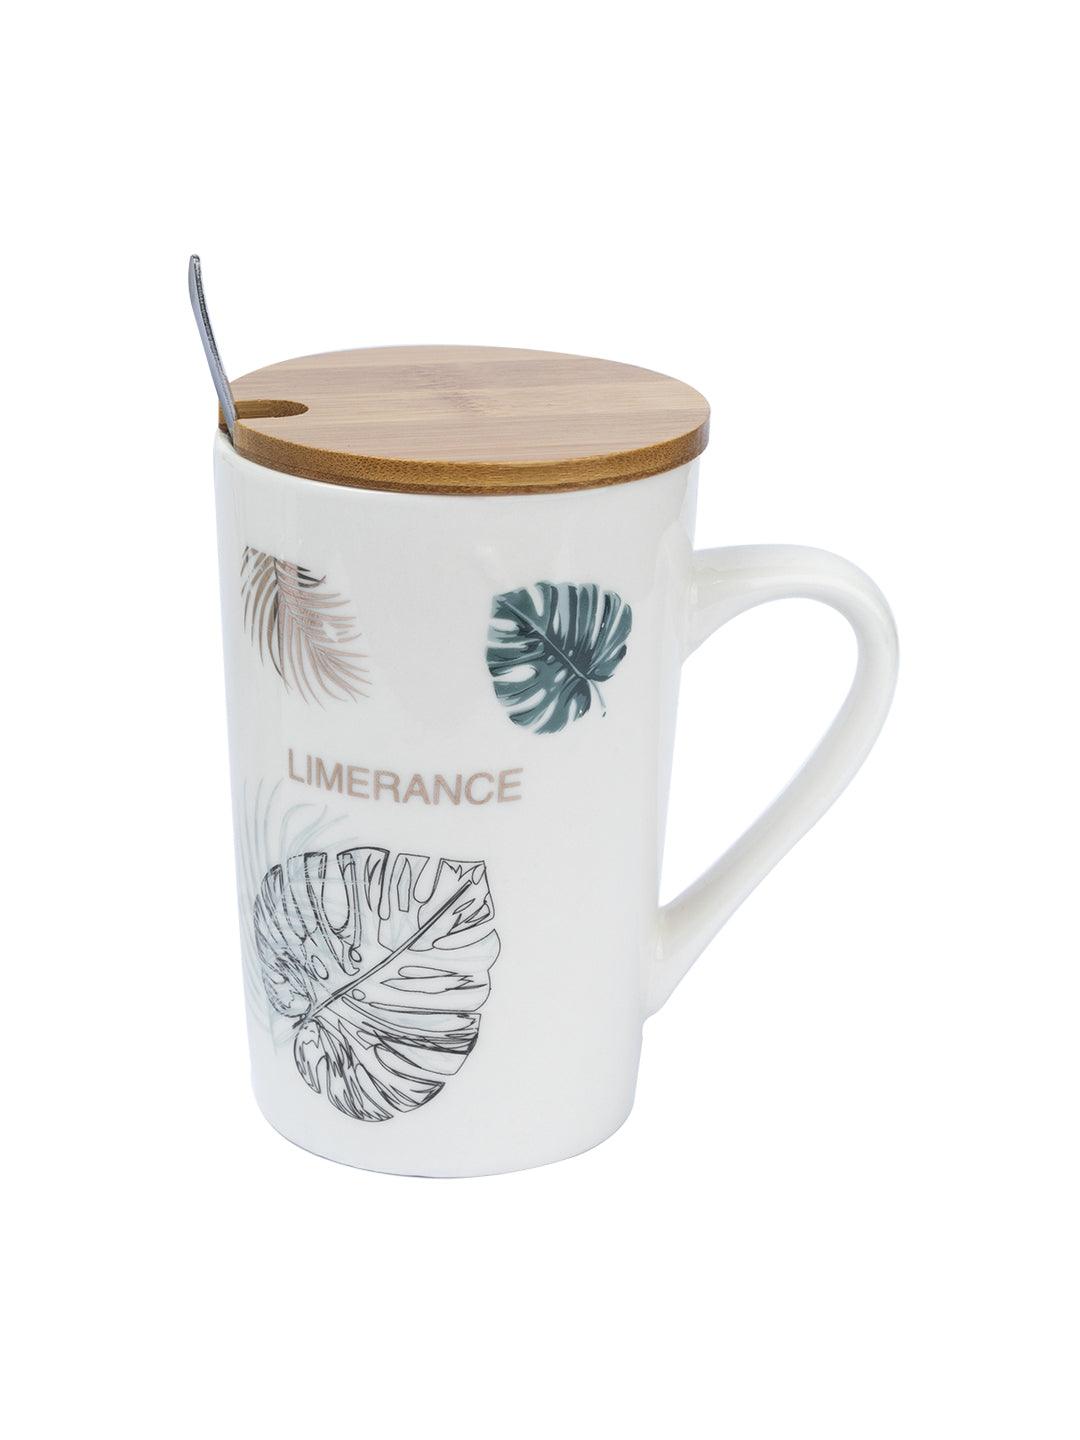 LIMERANCE' Coffee Mug With Wooden Lid and Spoon - White, 450mL - MARKET 99